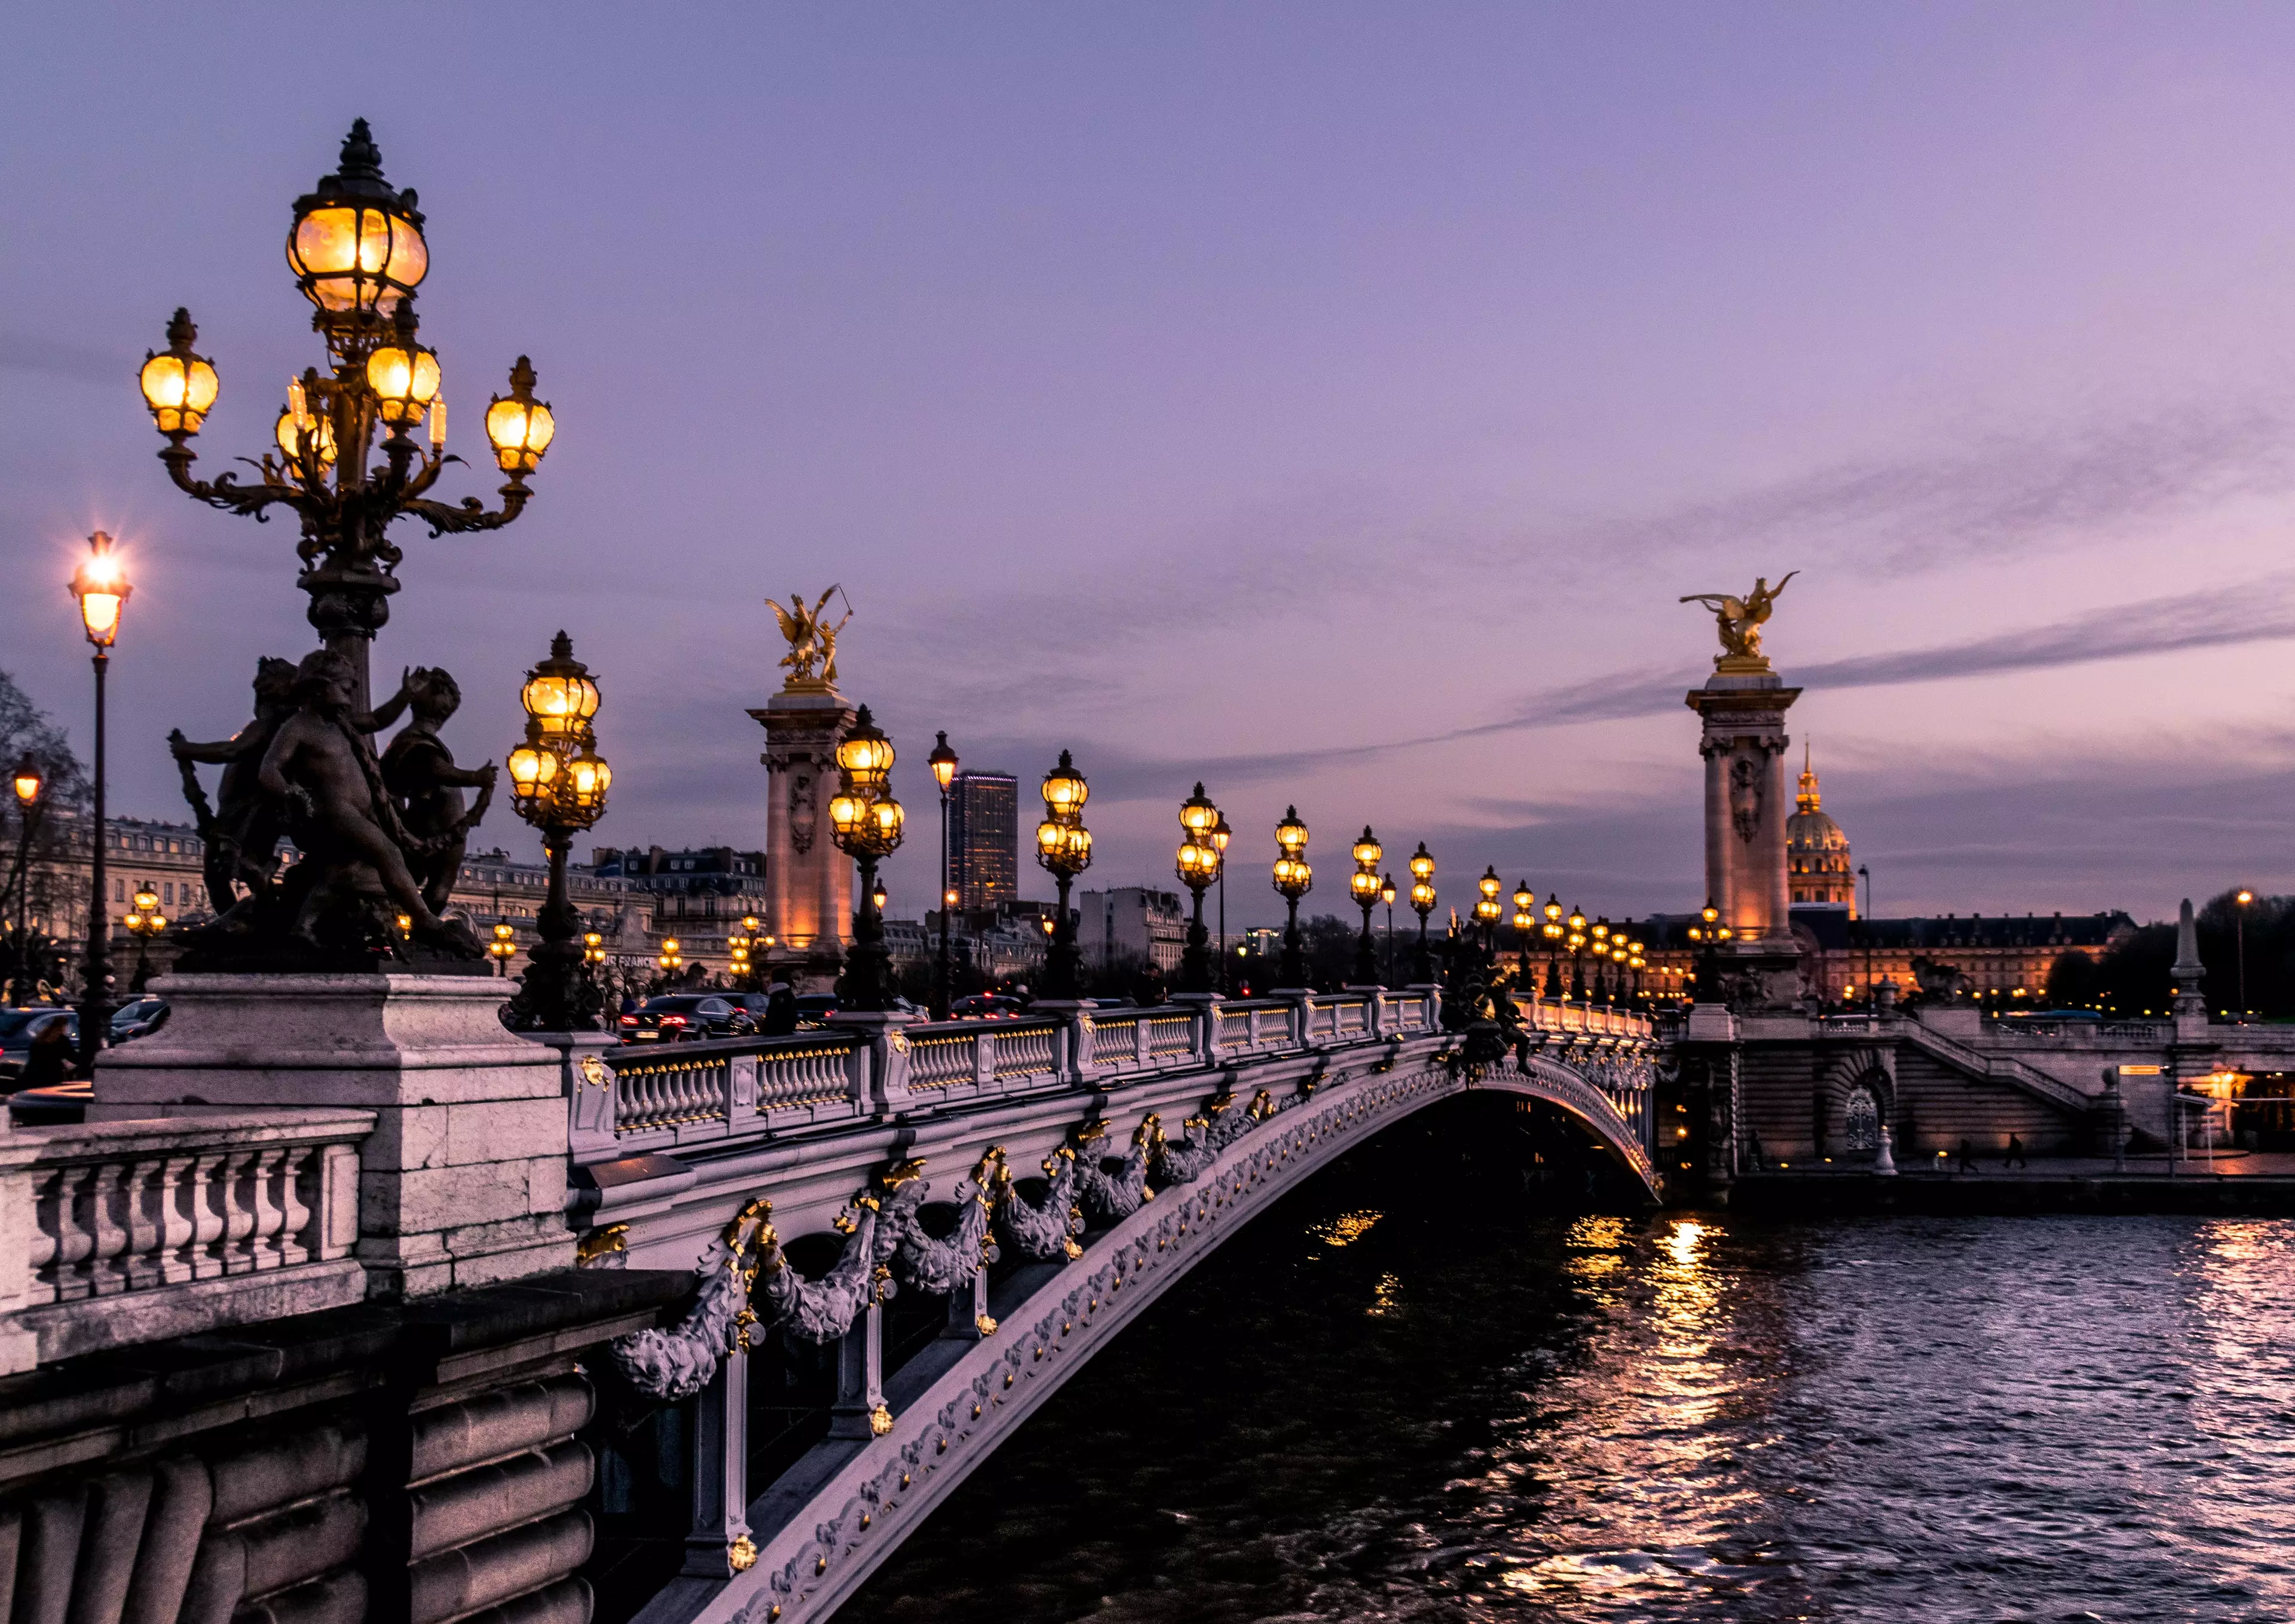 You can travel to Paris for £25.